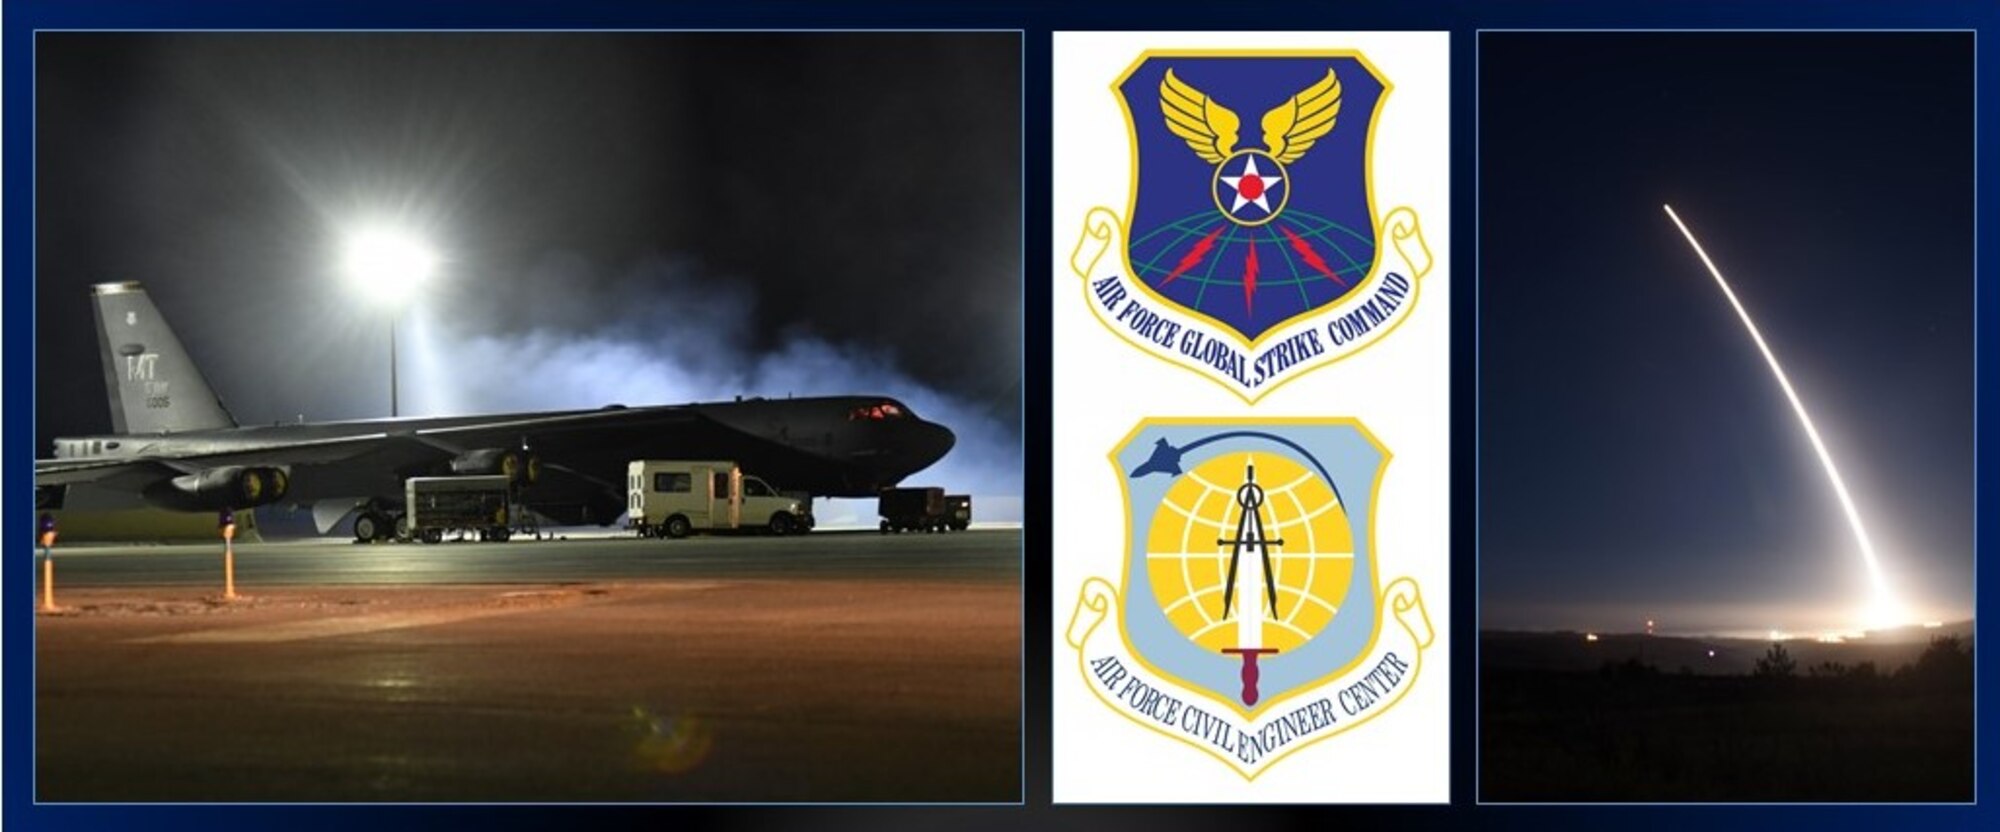 The Air Force Civil Engineer Center recently stood up a new division to support the U.S. nuclear triad. The nuclear enterprise division, or CFN, supports the Department of Defense’s nuclear triad by integrating modernization efforts for the two Air Force-led nuclear delivery systems — intercontinental ballistic missiles and bombers.